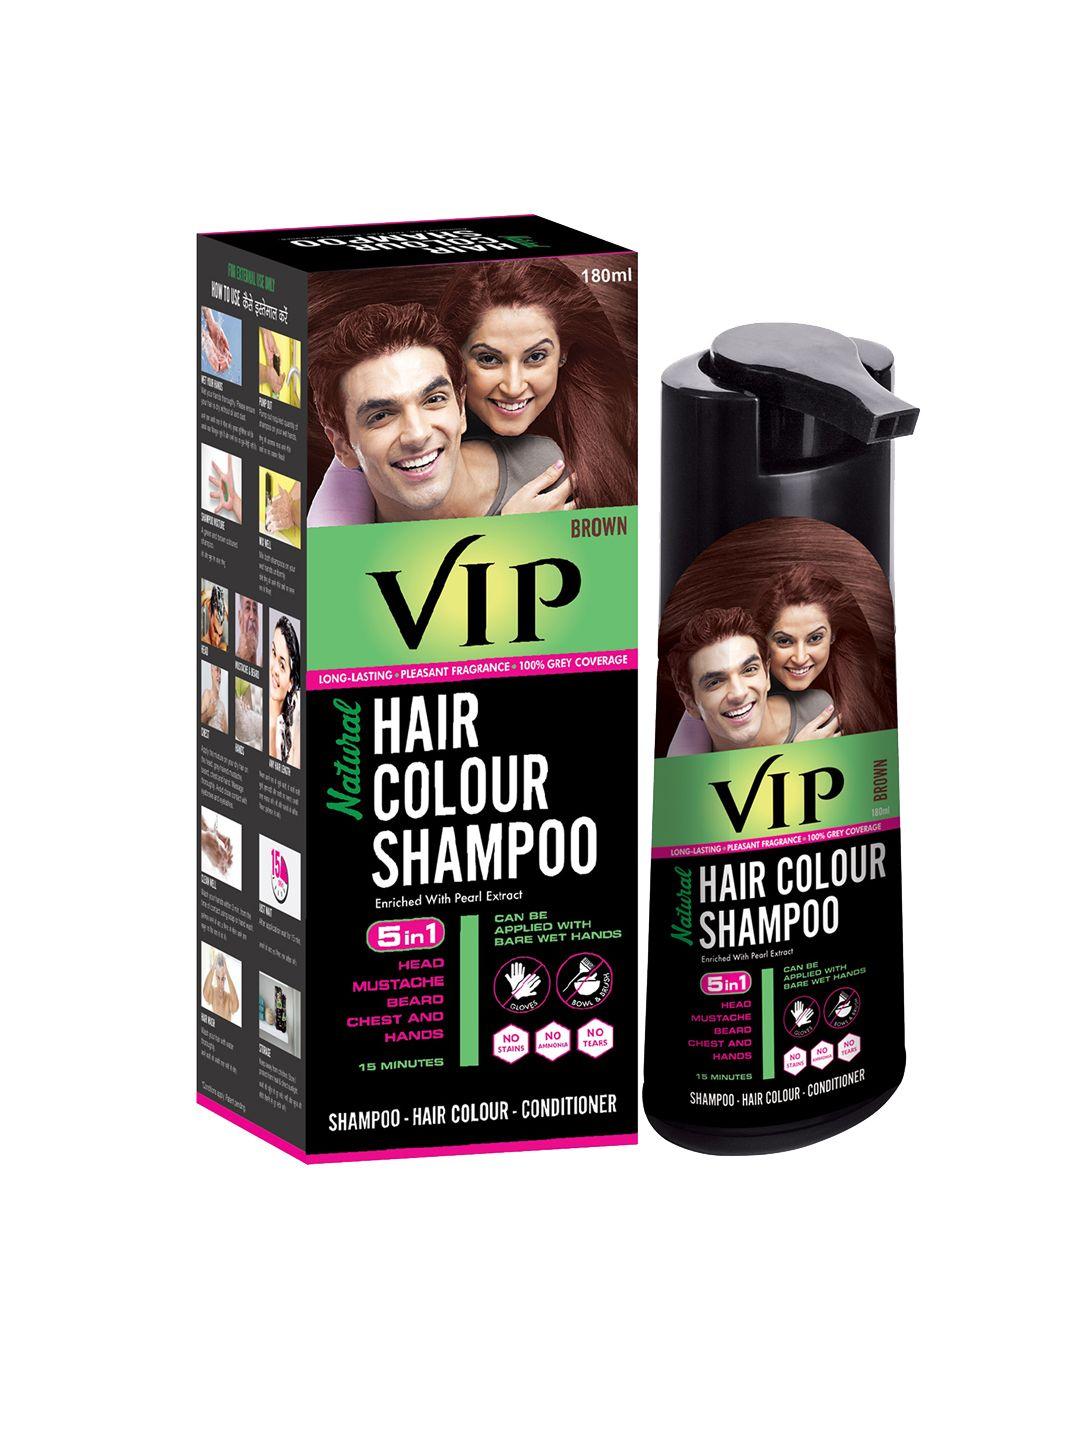 vip hair colour shampoo cum conditioner with pearl extract - brown 180ml